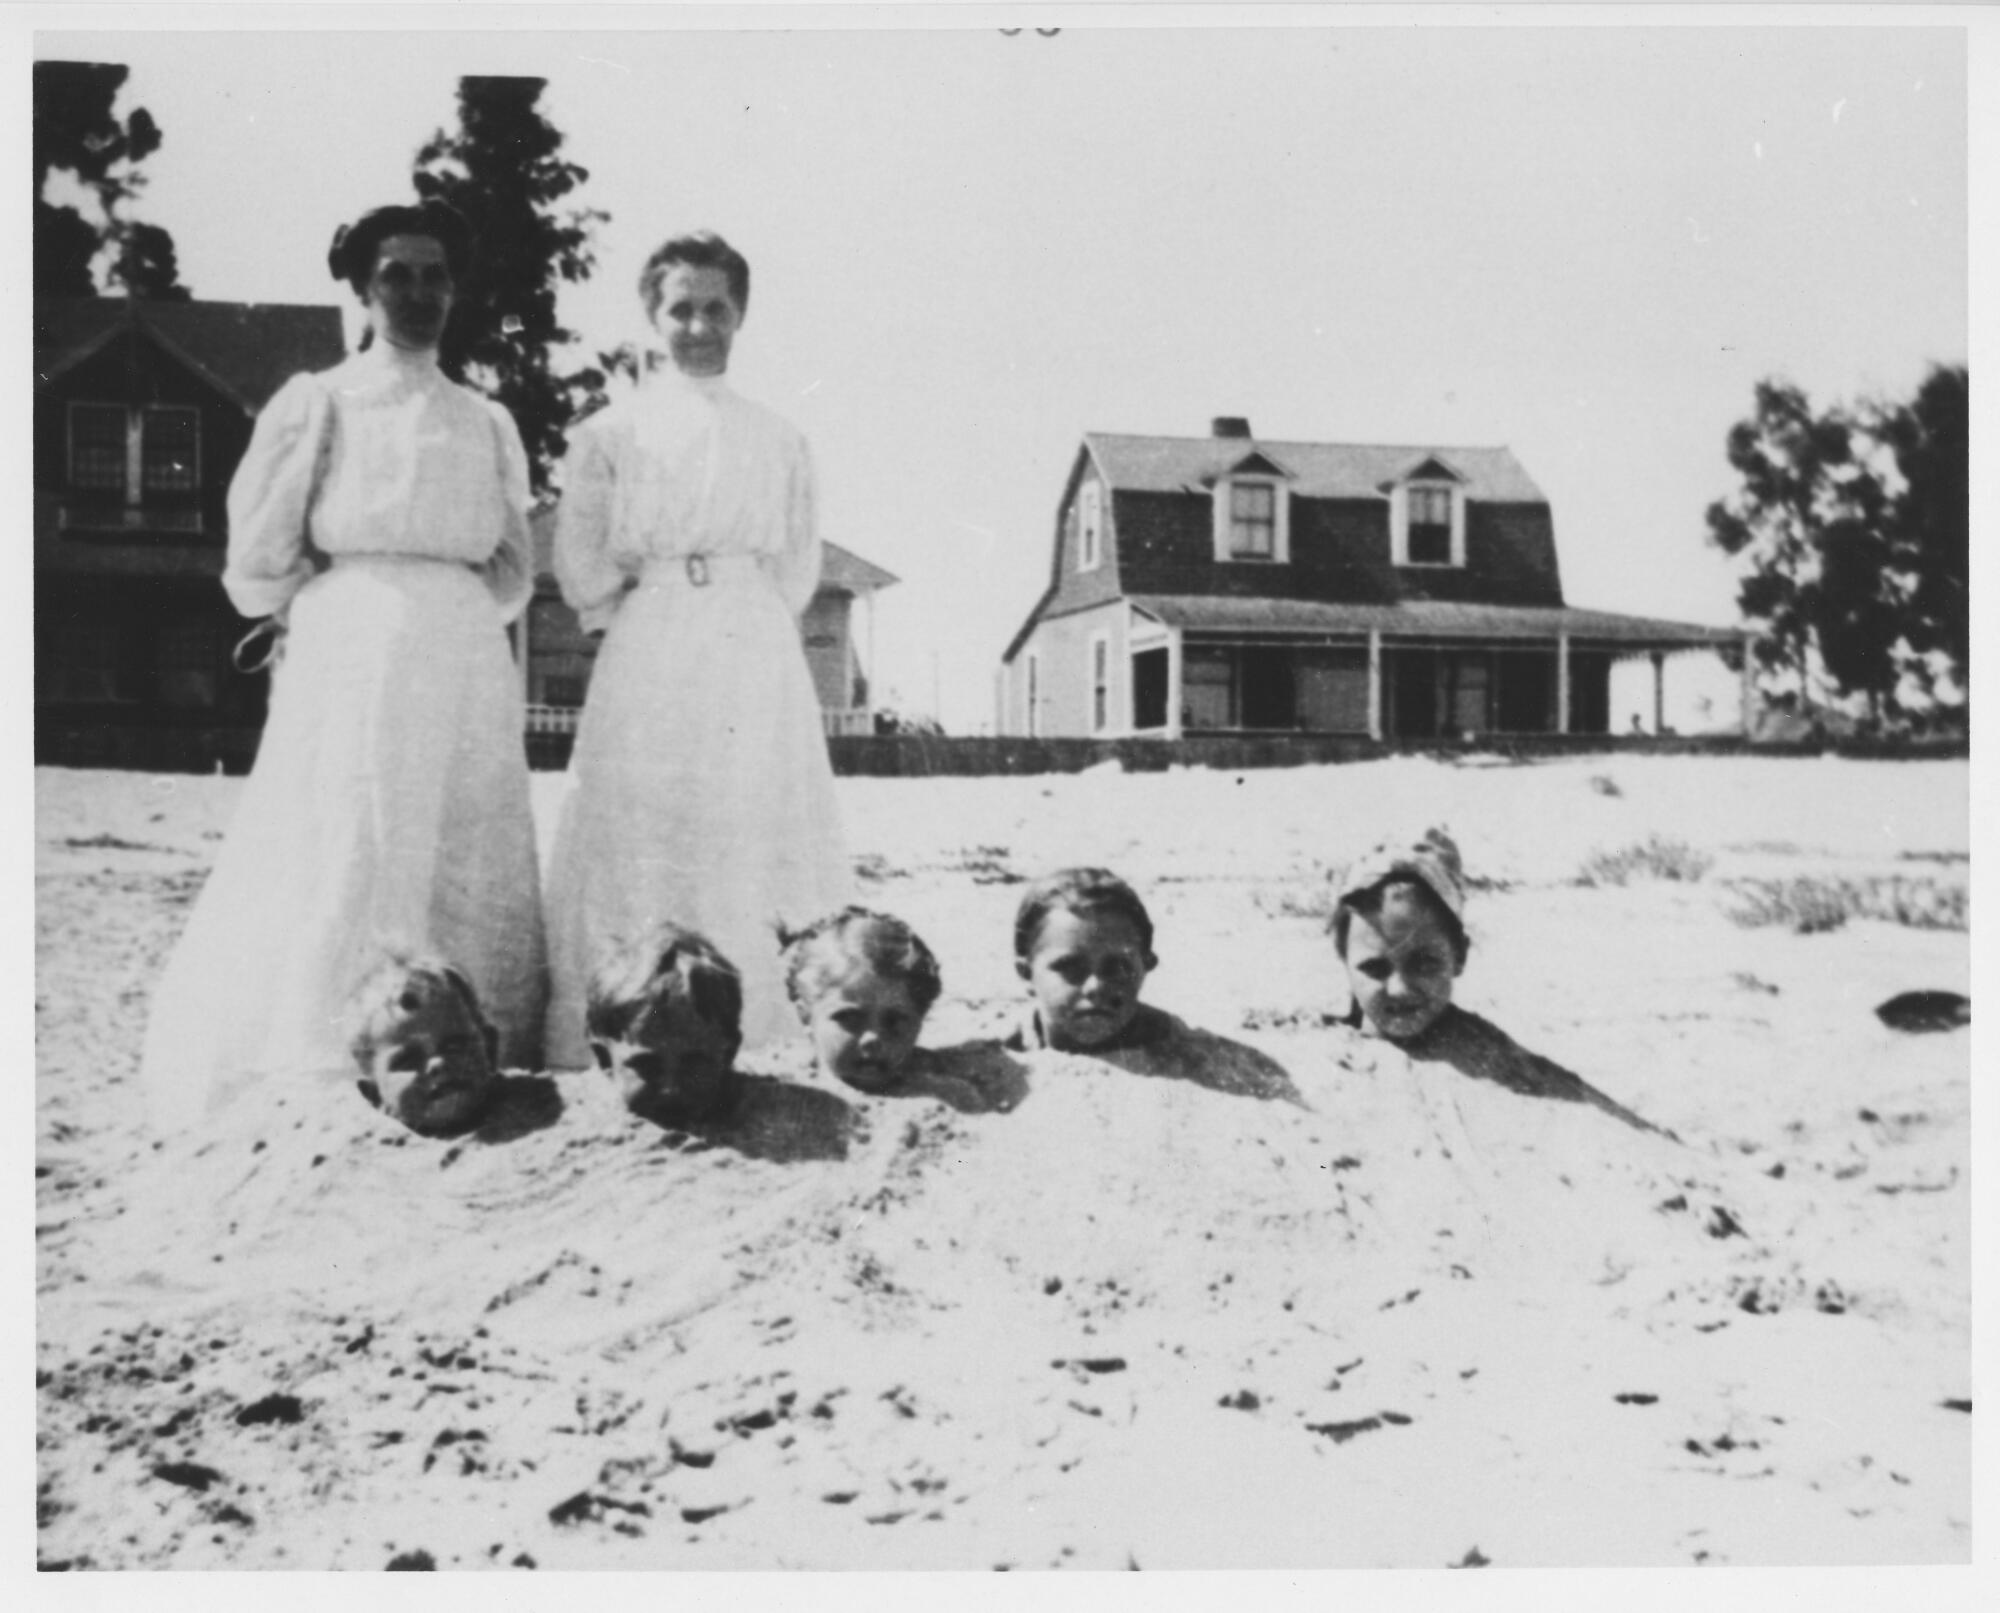 A vintage photo shows two women in dresses standing on a beach with five children buried up to their necks in sand.